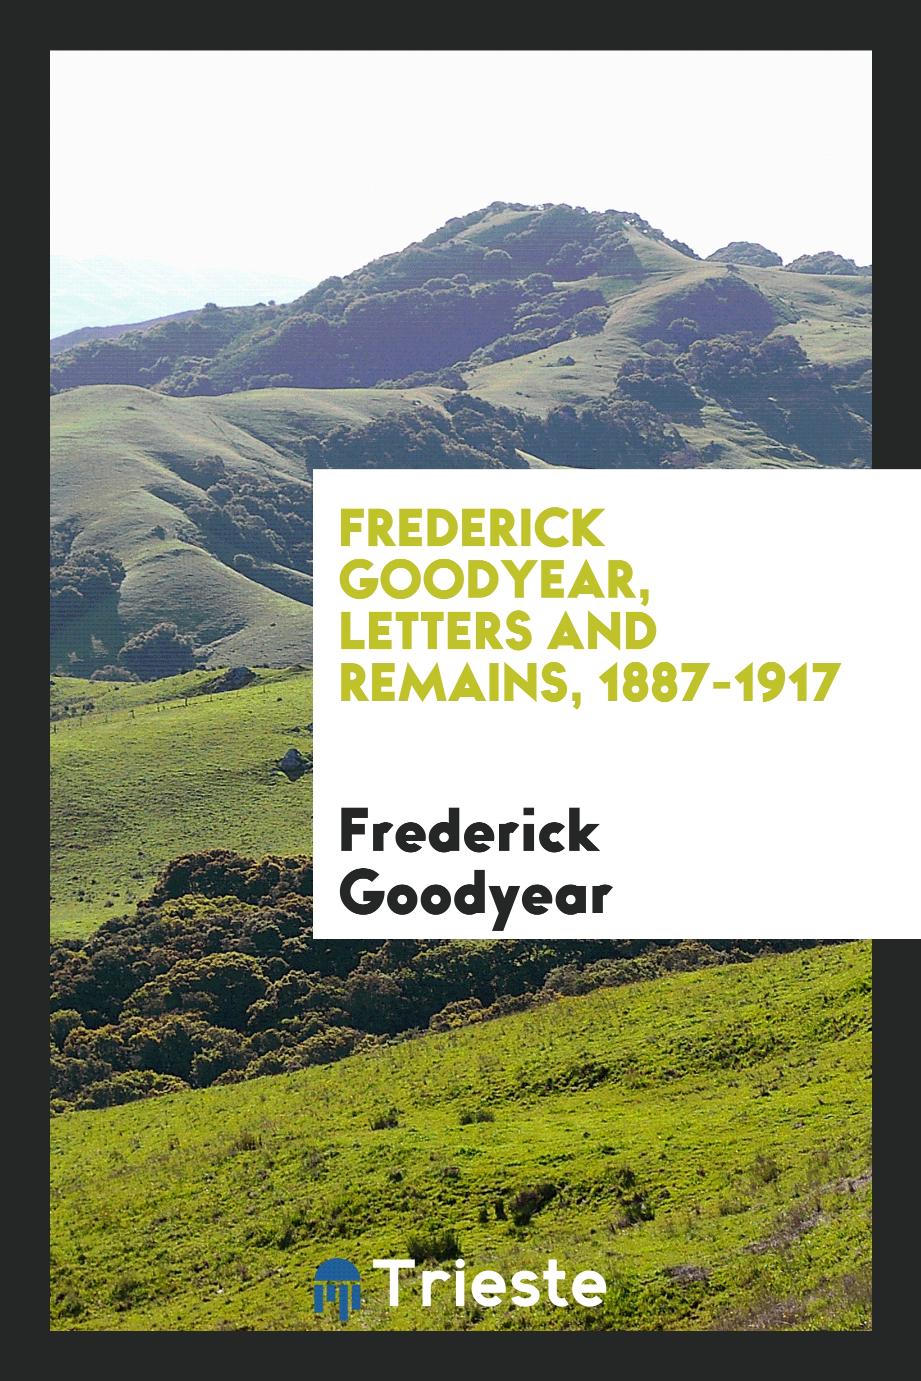 Frederick Goodyear, letters and remains, 1887-1917